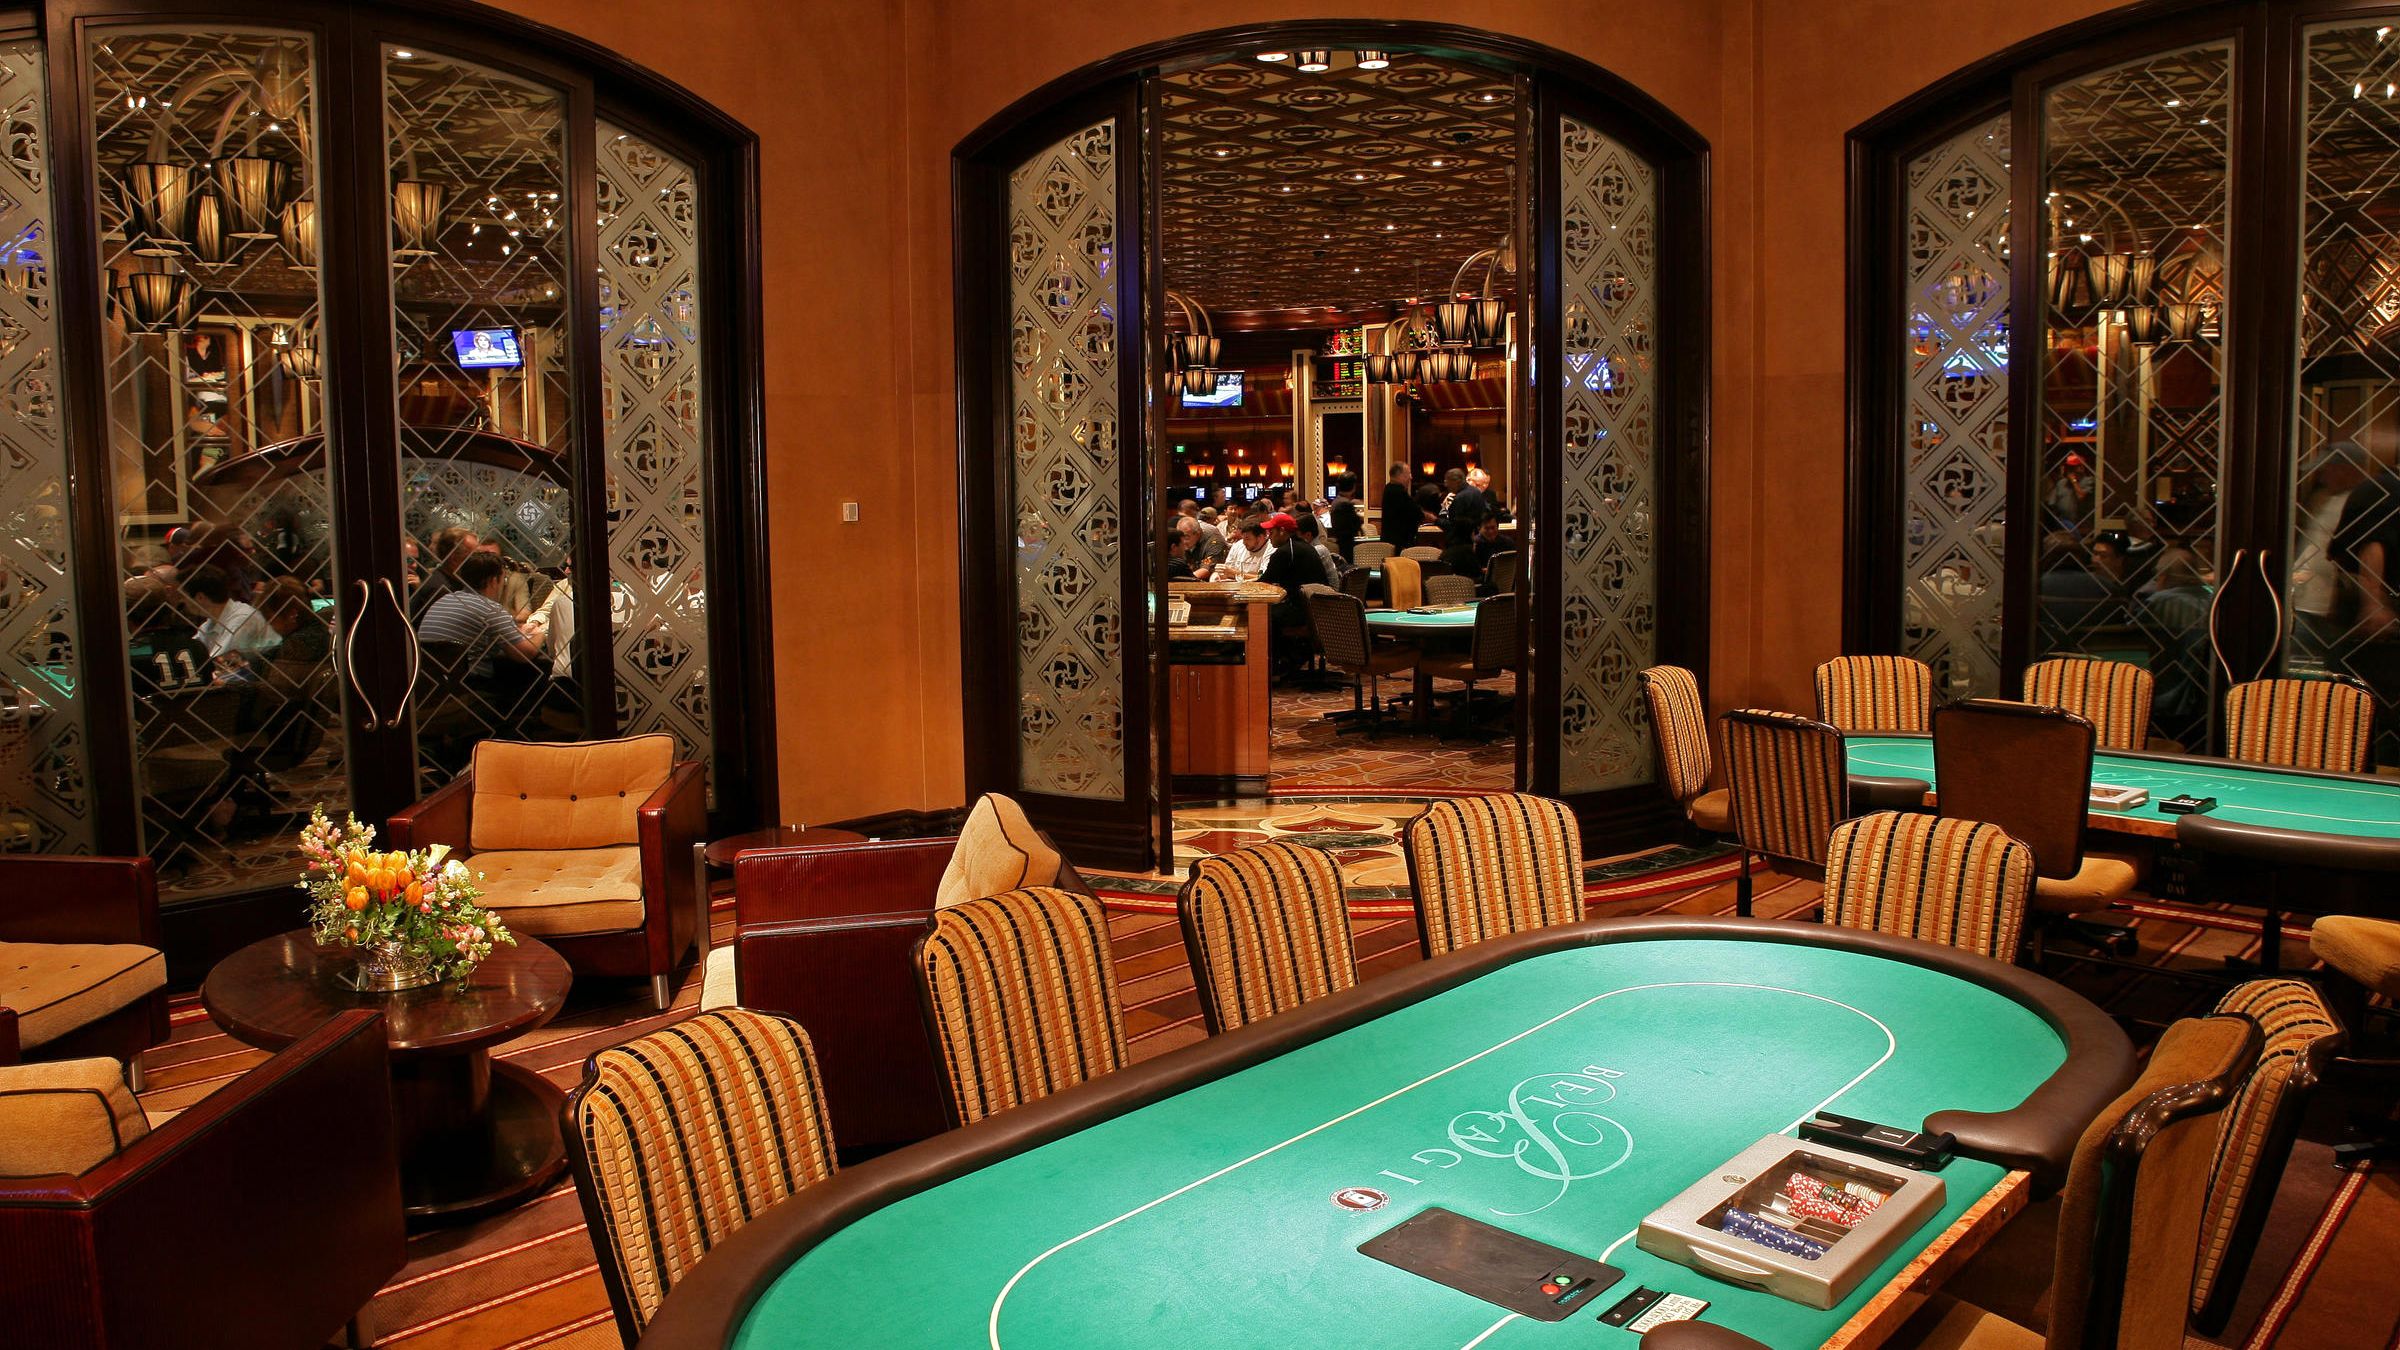 15 of the Best Places to Gamble in Las Vegas